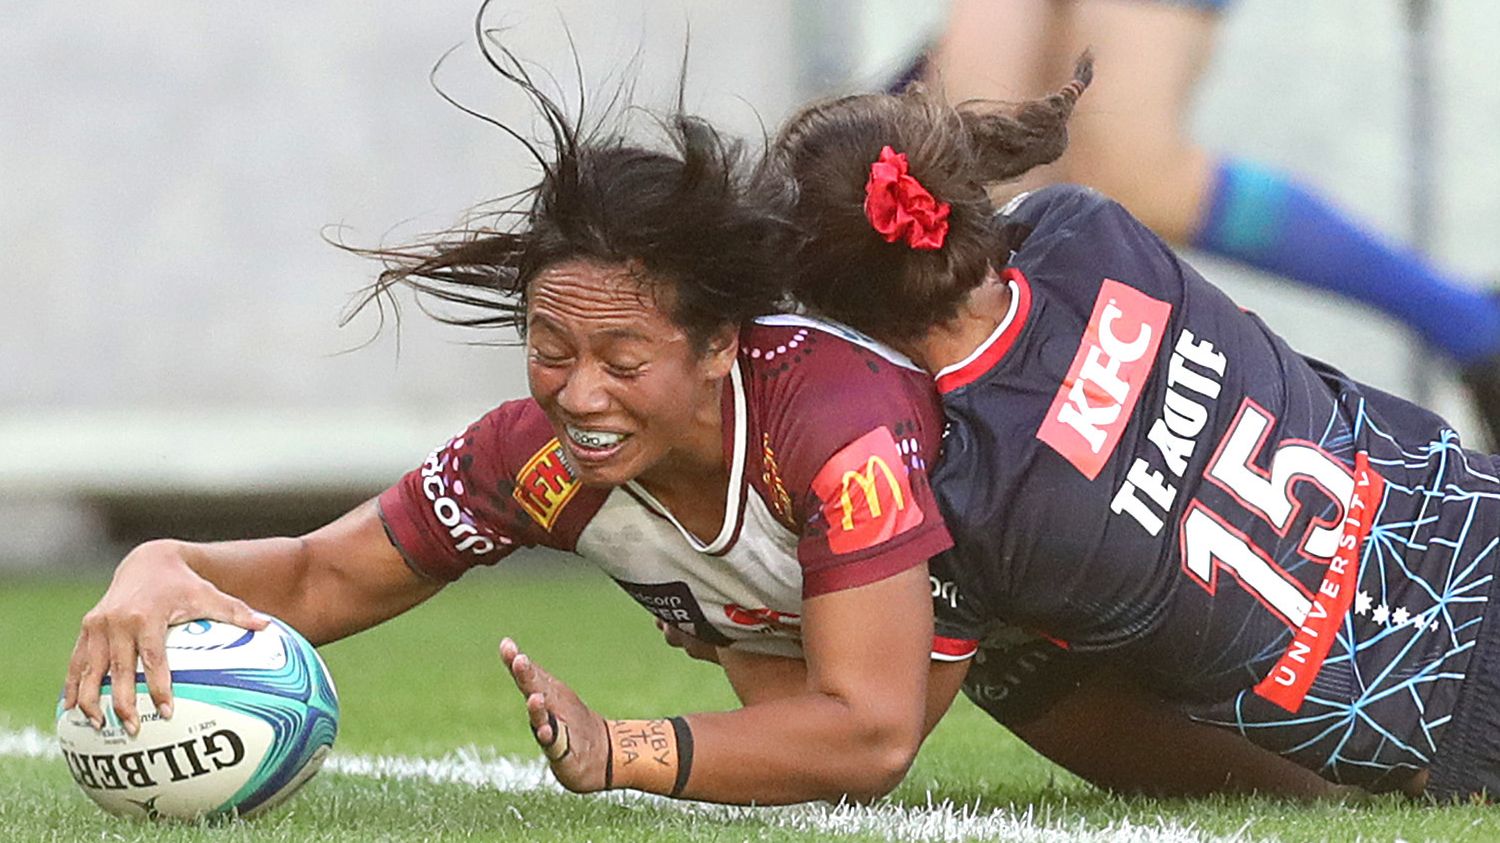 Cecilia Smith of the Reds scores a try.